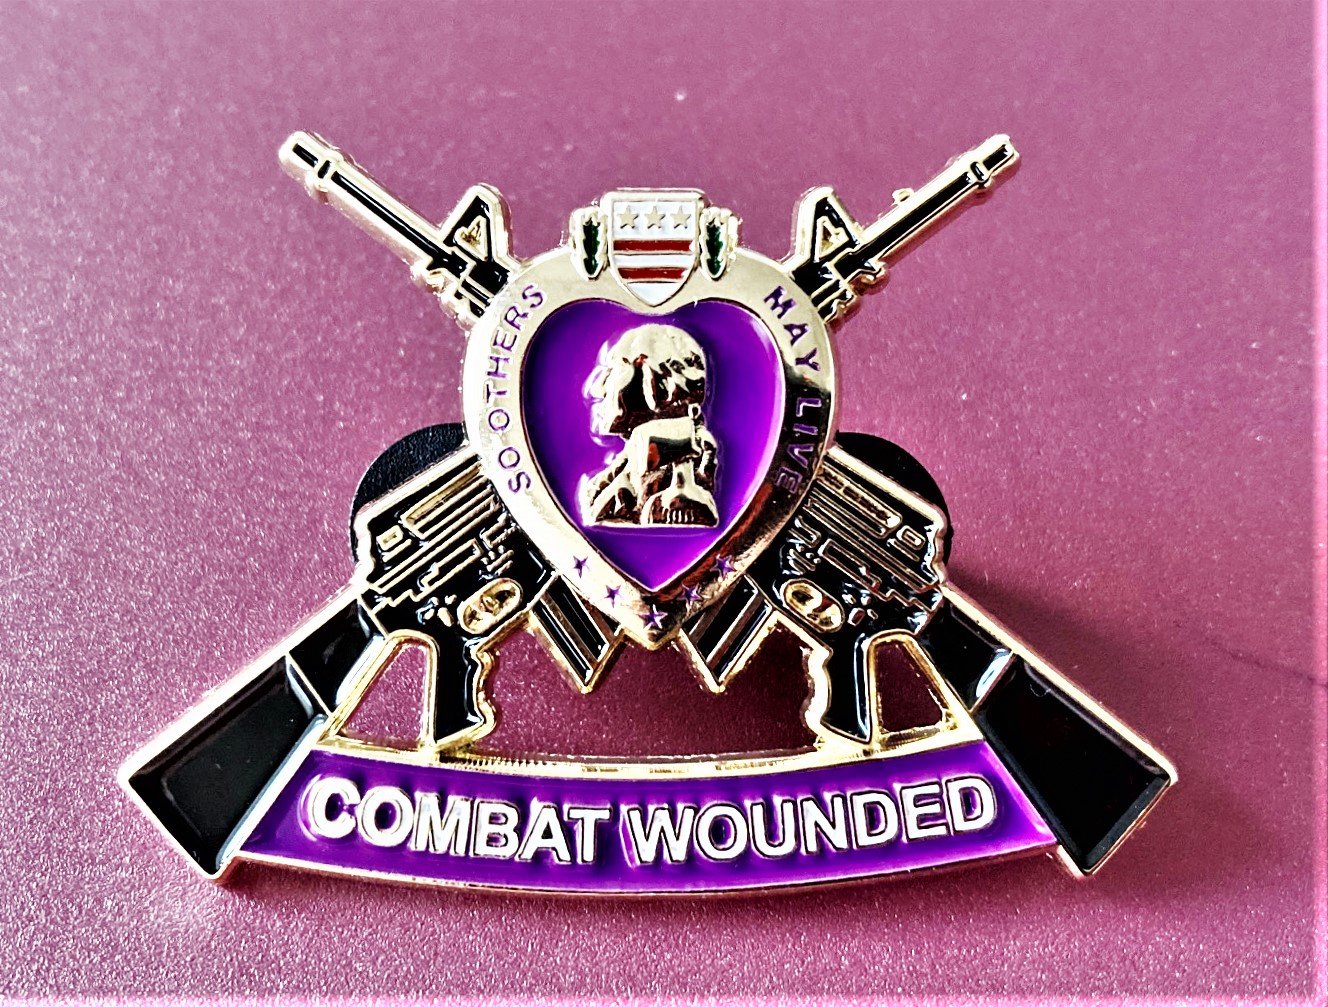 Image of Combat Wounded Crossed M16's pin